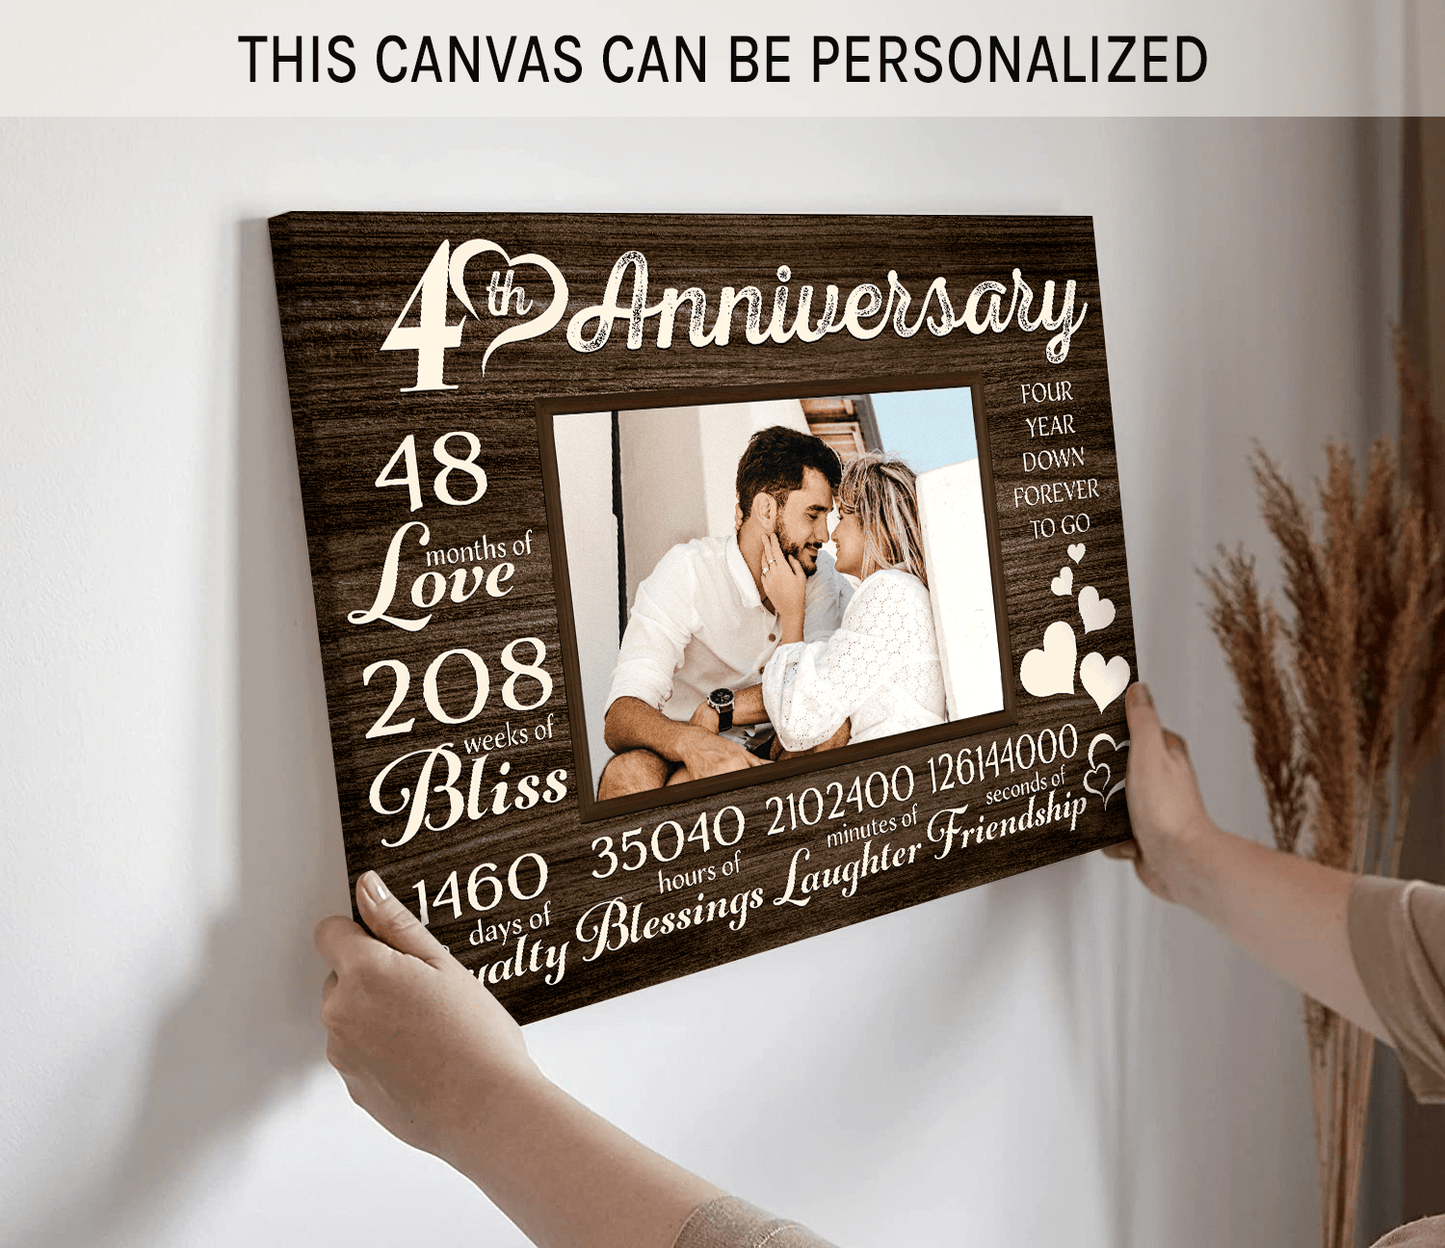 Personalized 4 year anniversary gift for him for her - 48 months of love - custom Couple Canvas print - MyMindfulGifts